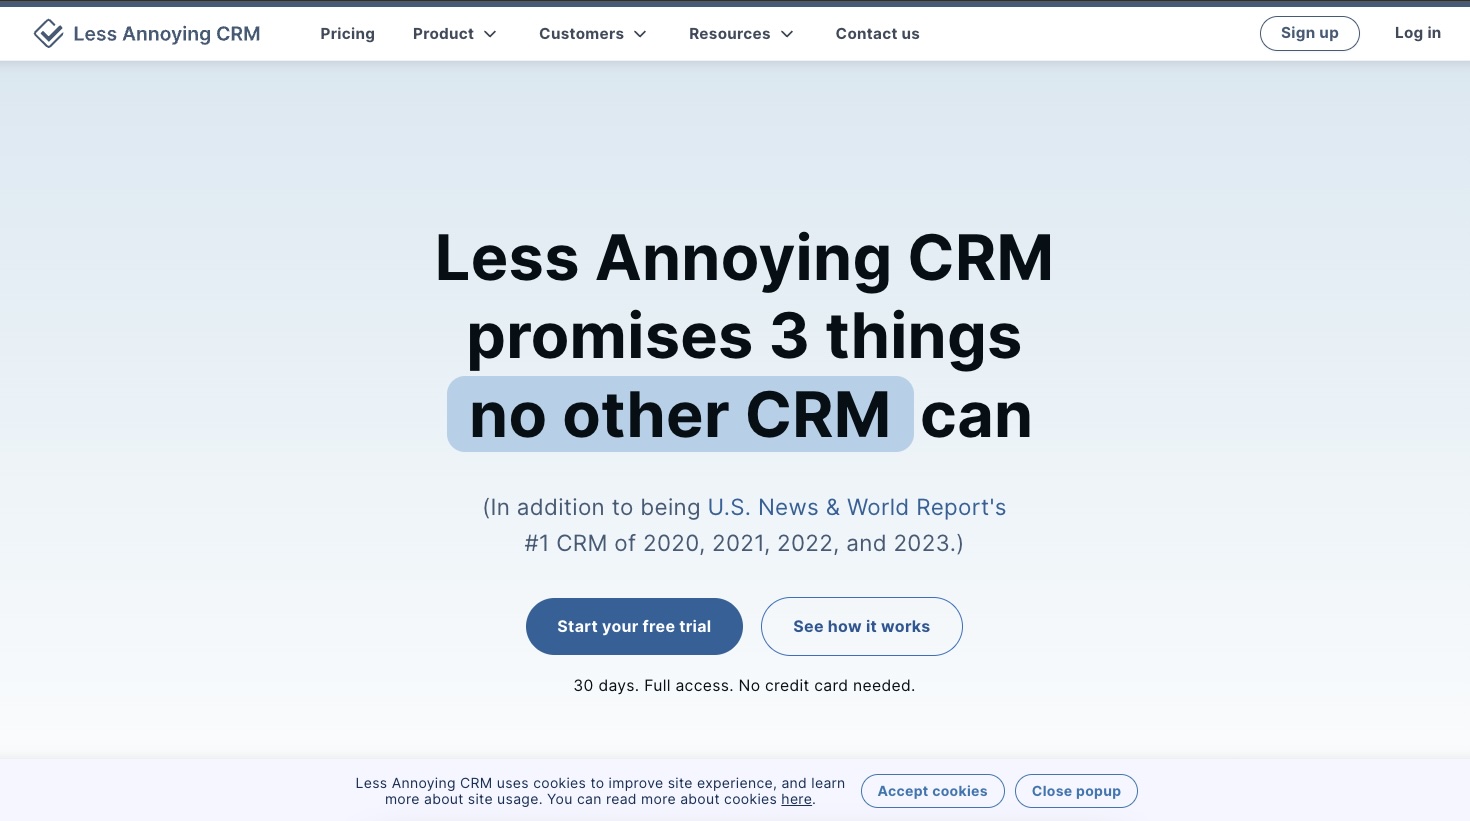 Less Annoying CRM homepage